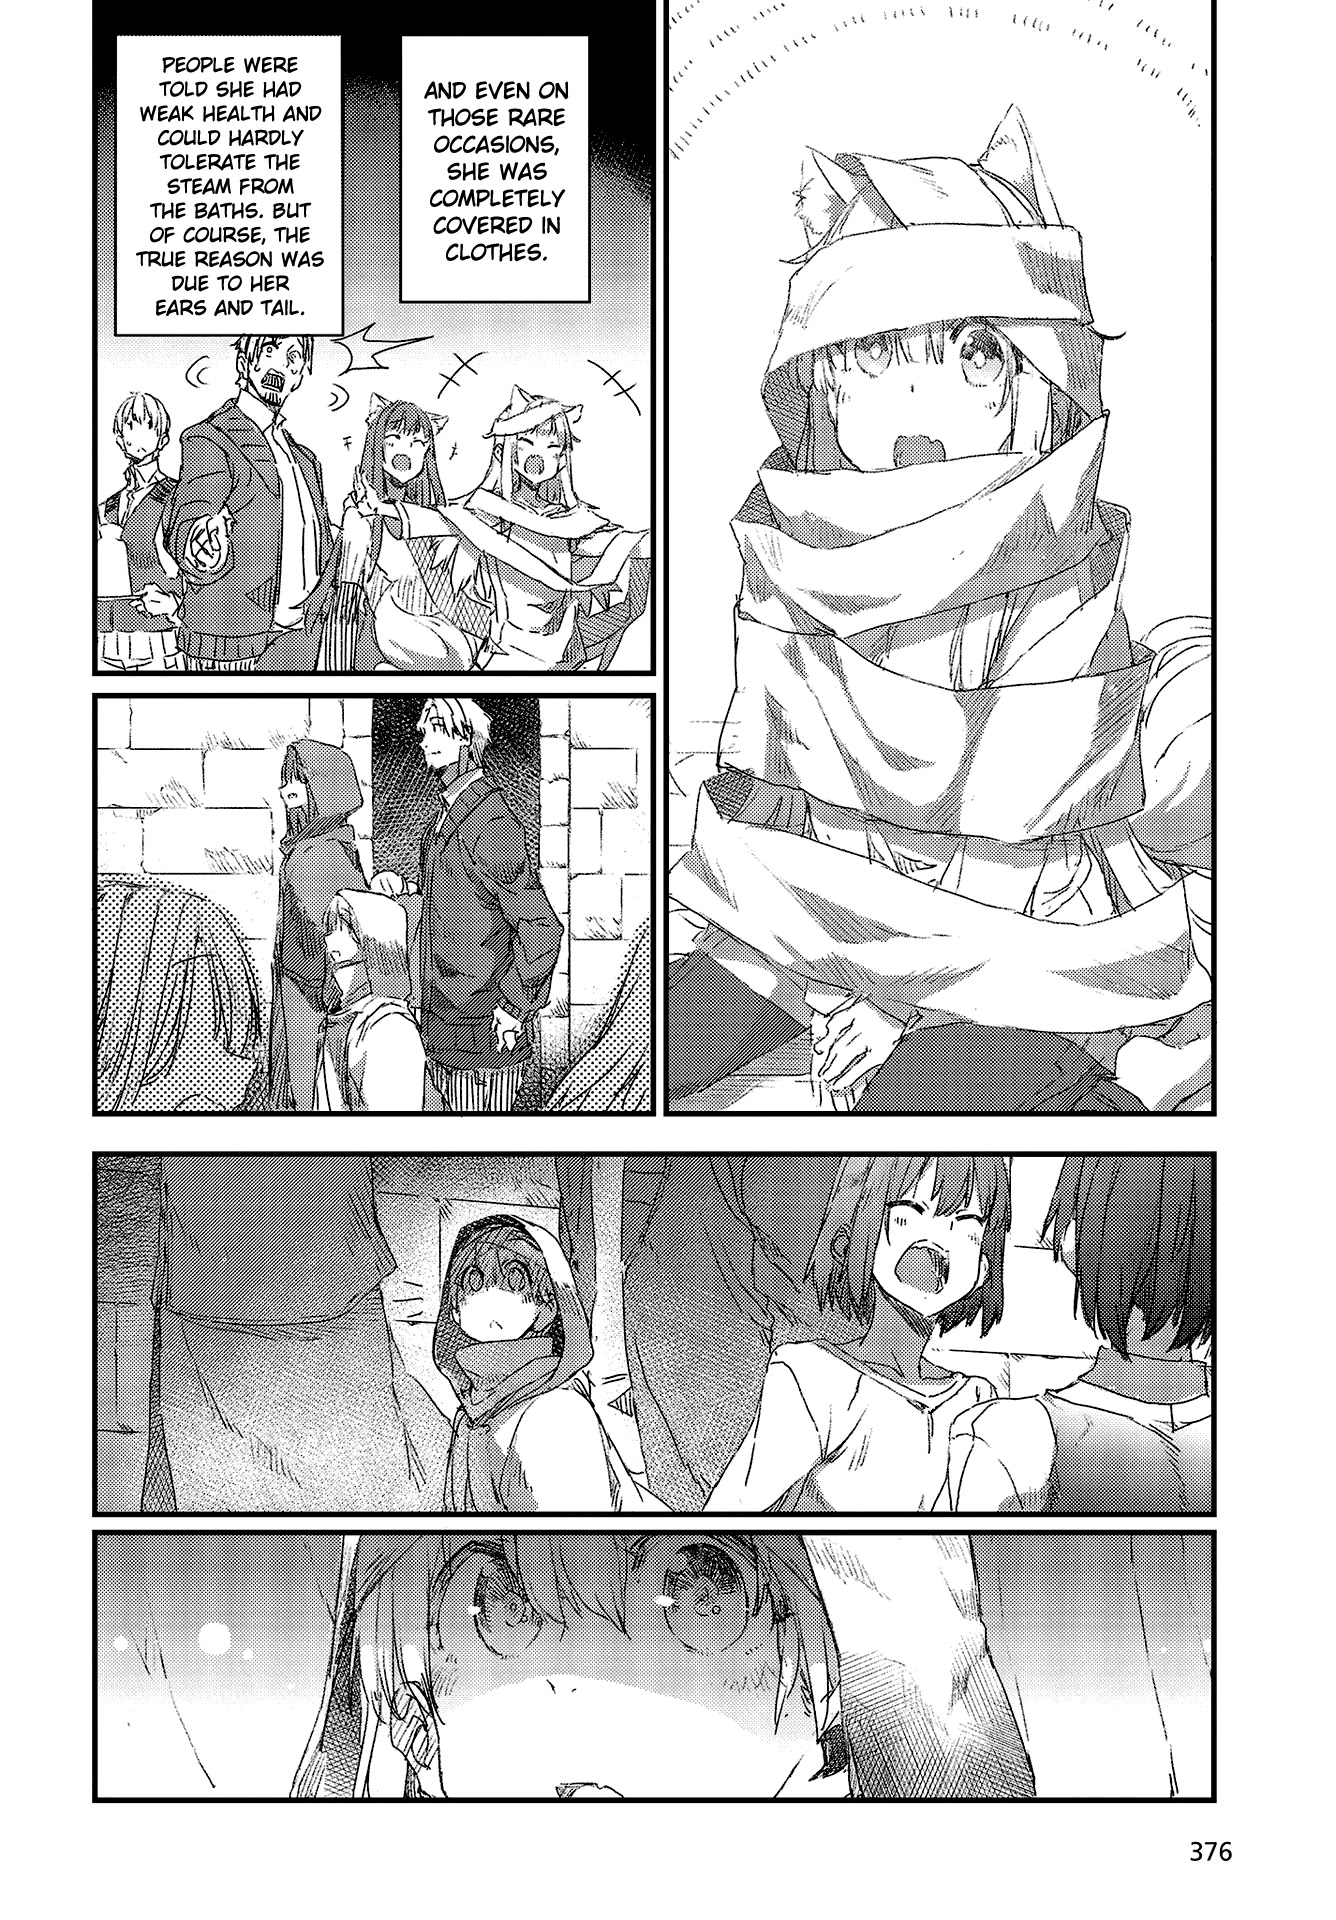 Wolf & Parchment: New Theory Spice & Wolf - Page 2